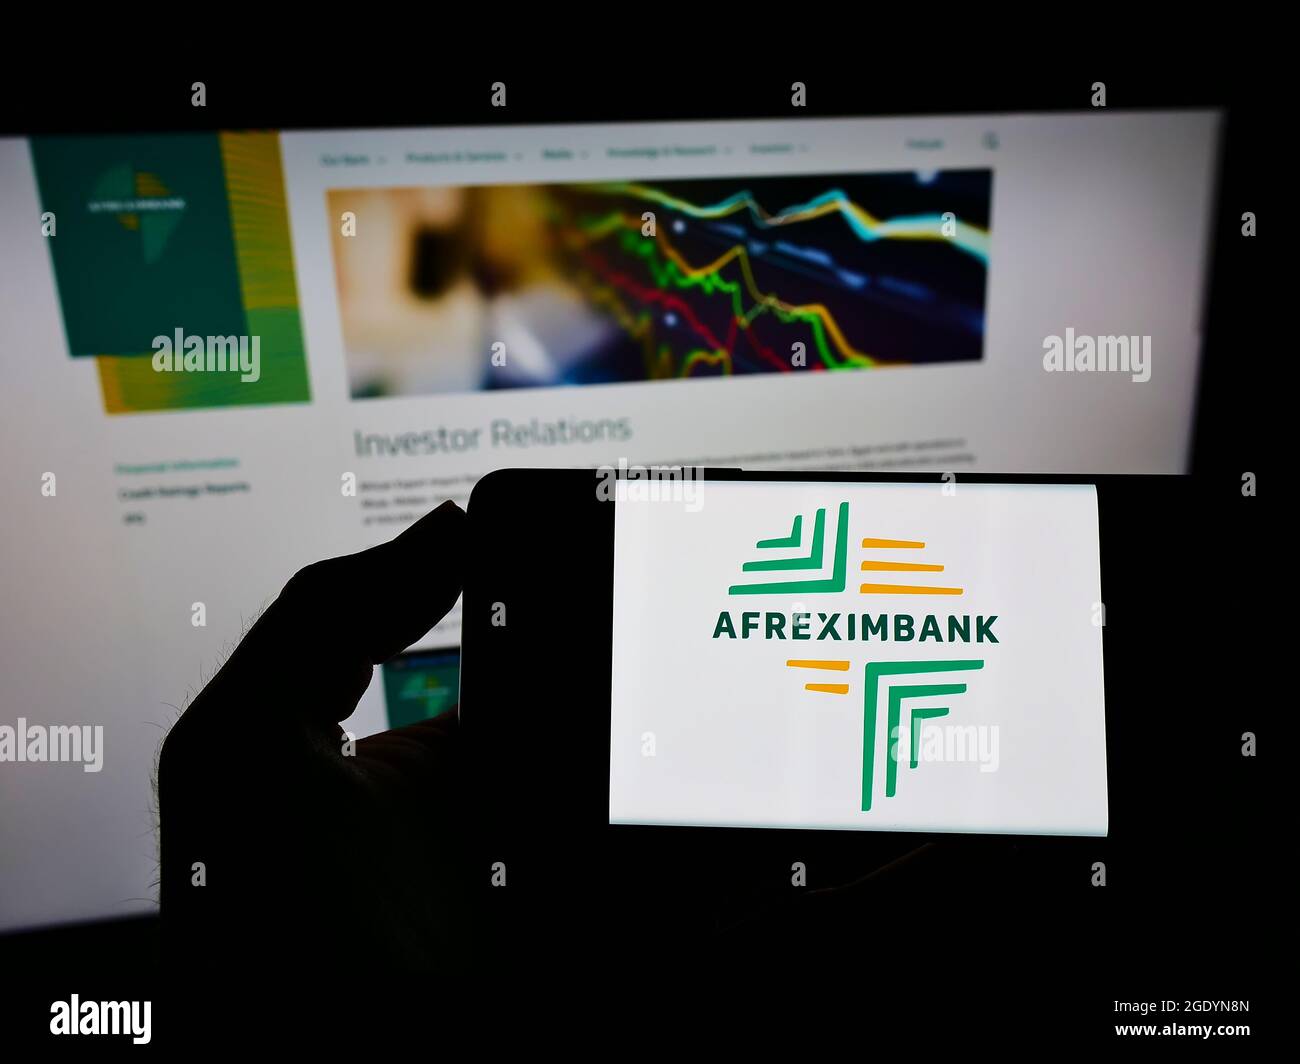 Person holding mobile phone with logo of company African Export–Import Bank (Afreximbank) on screen in front of web page. Focus on phone display. Stock Photo